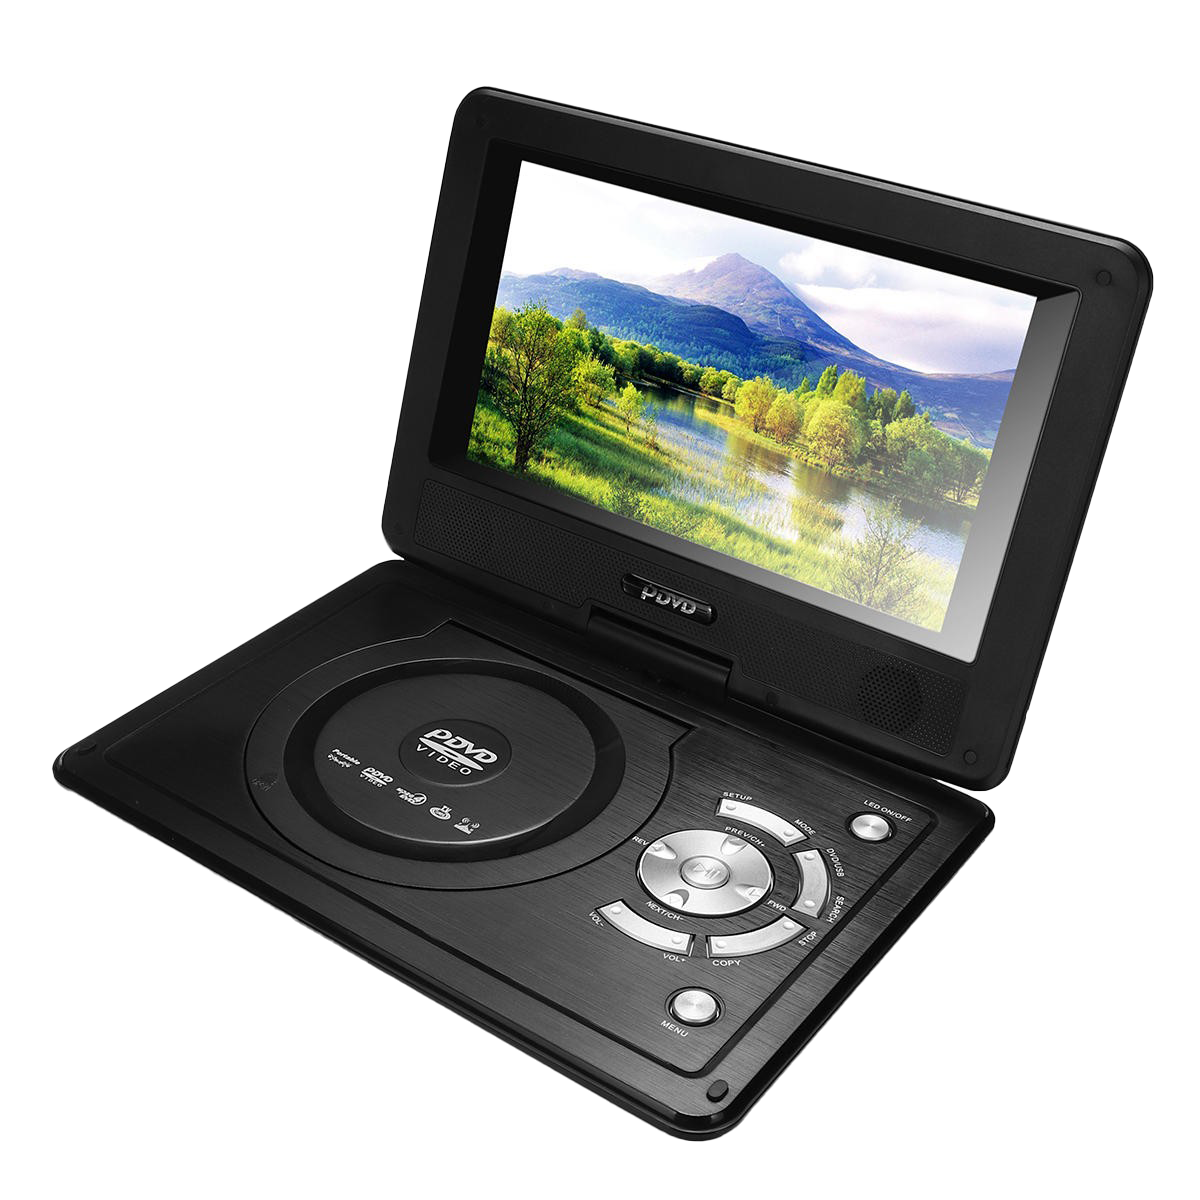 Portable DVD Player PNG Image Background